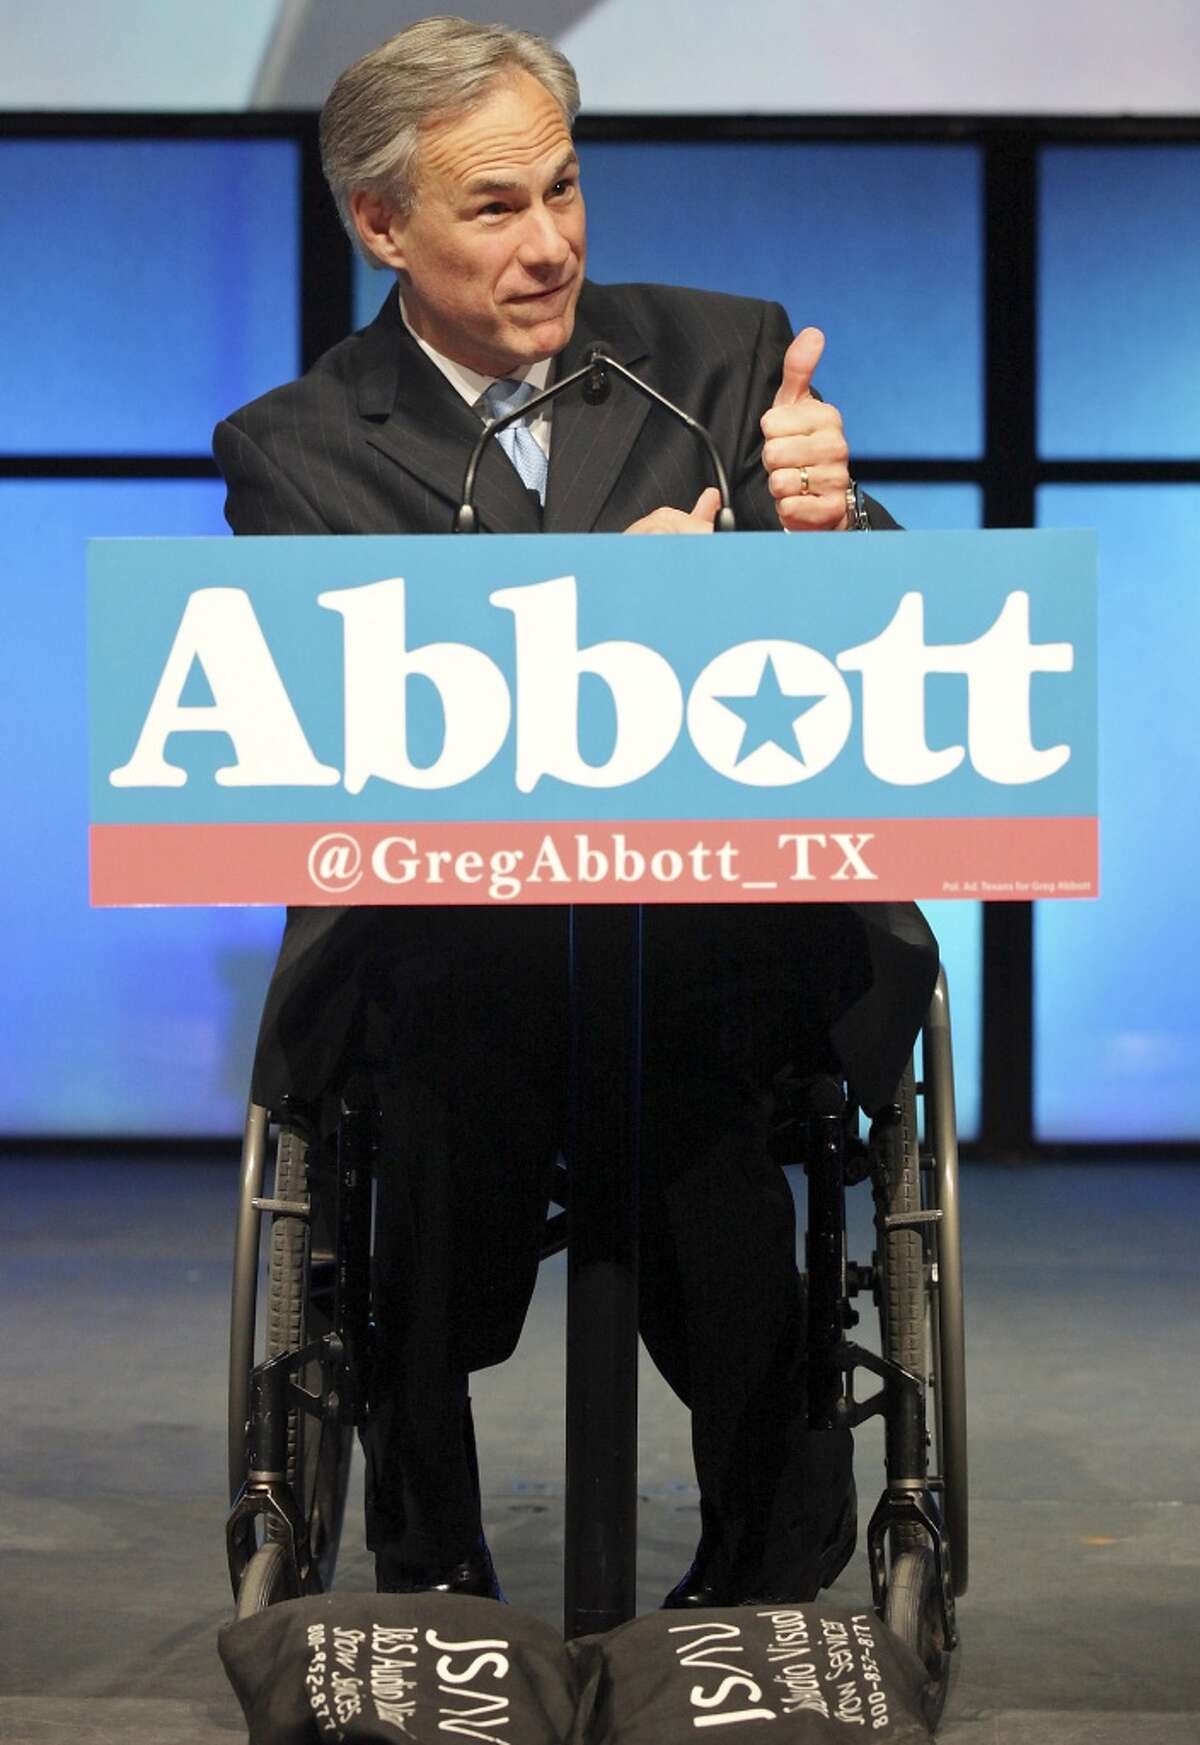 Texas Attorney General Greg Abbott gives a thumbs up as he speaks during the 2012 Texas GOP Convention held at the Fort Worth Convention Center June 7, 2012 in Fort Worth, Texas.